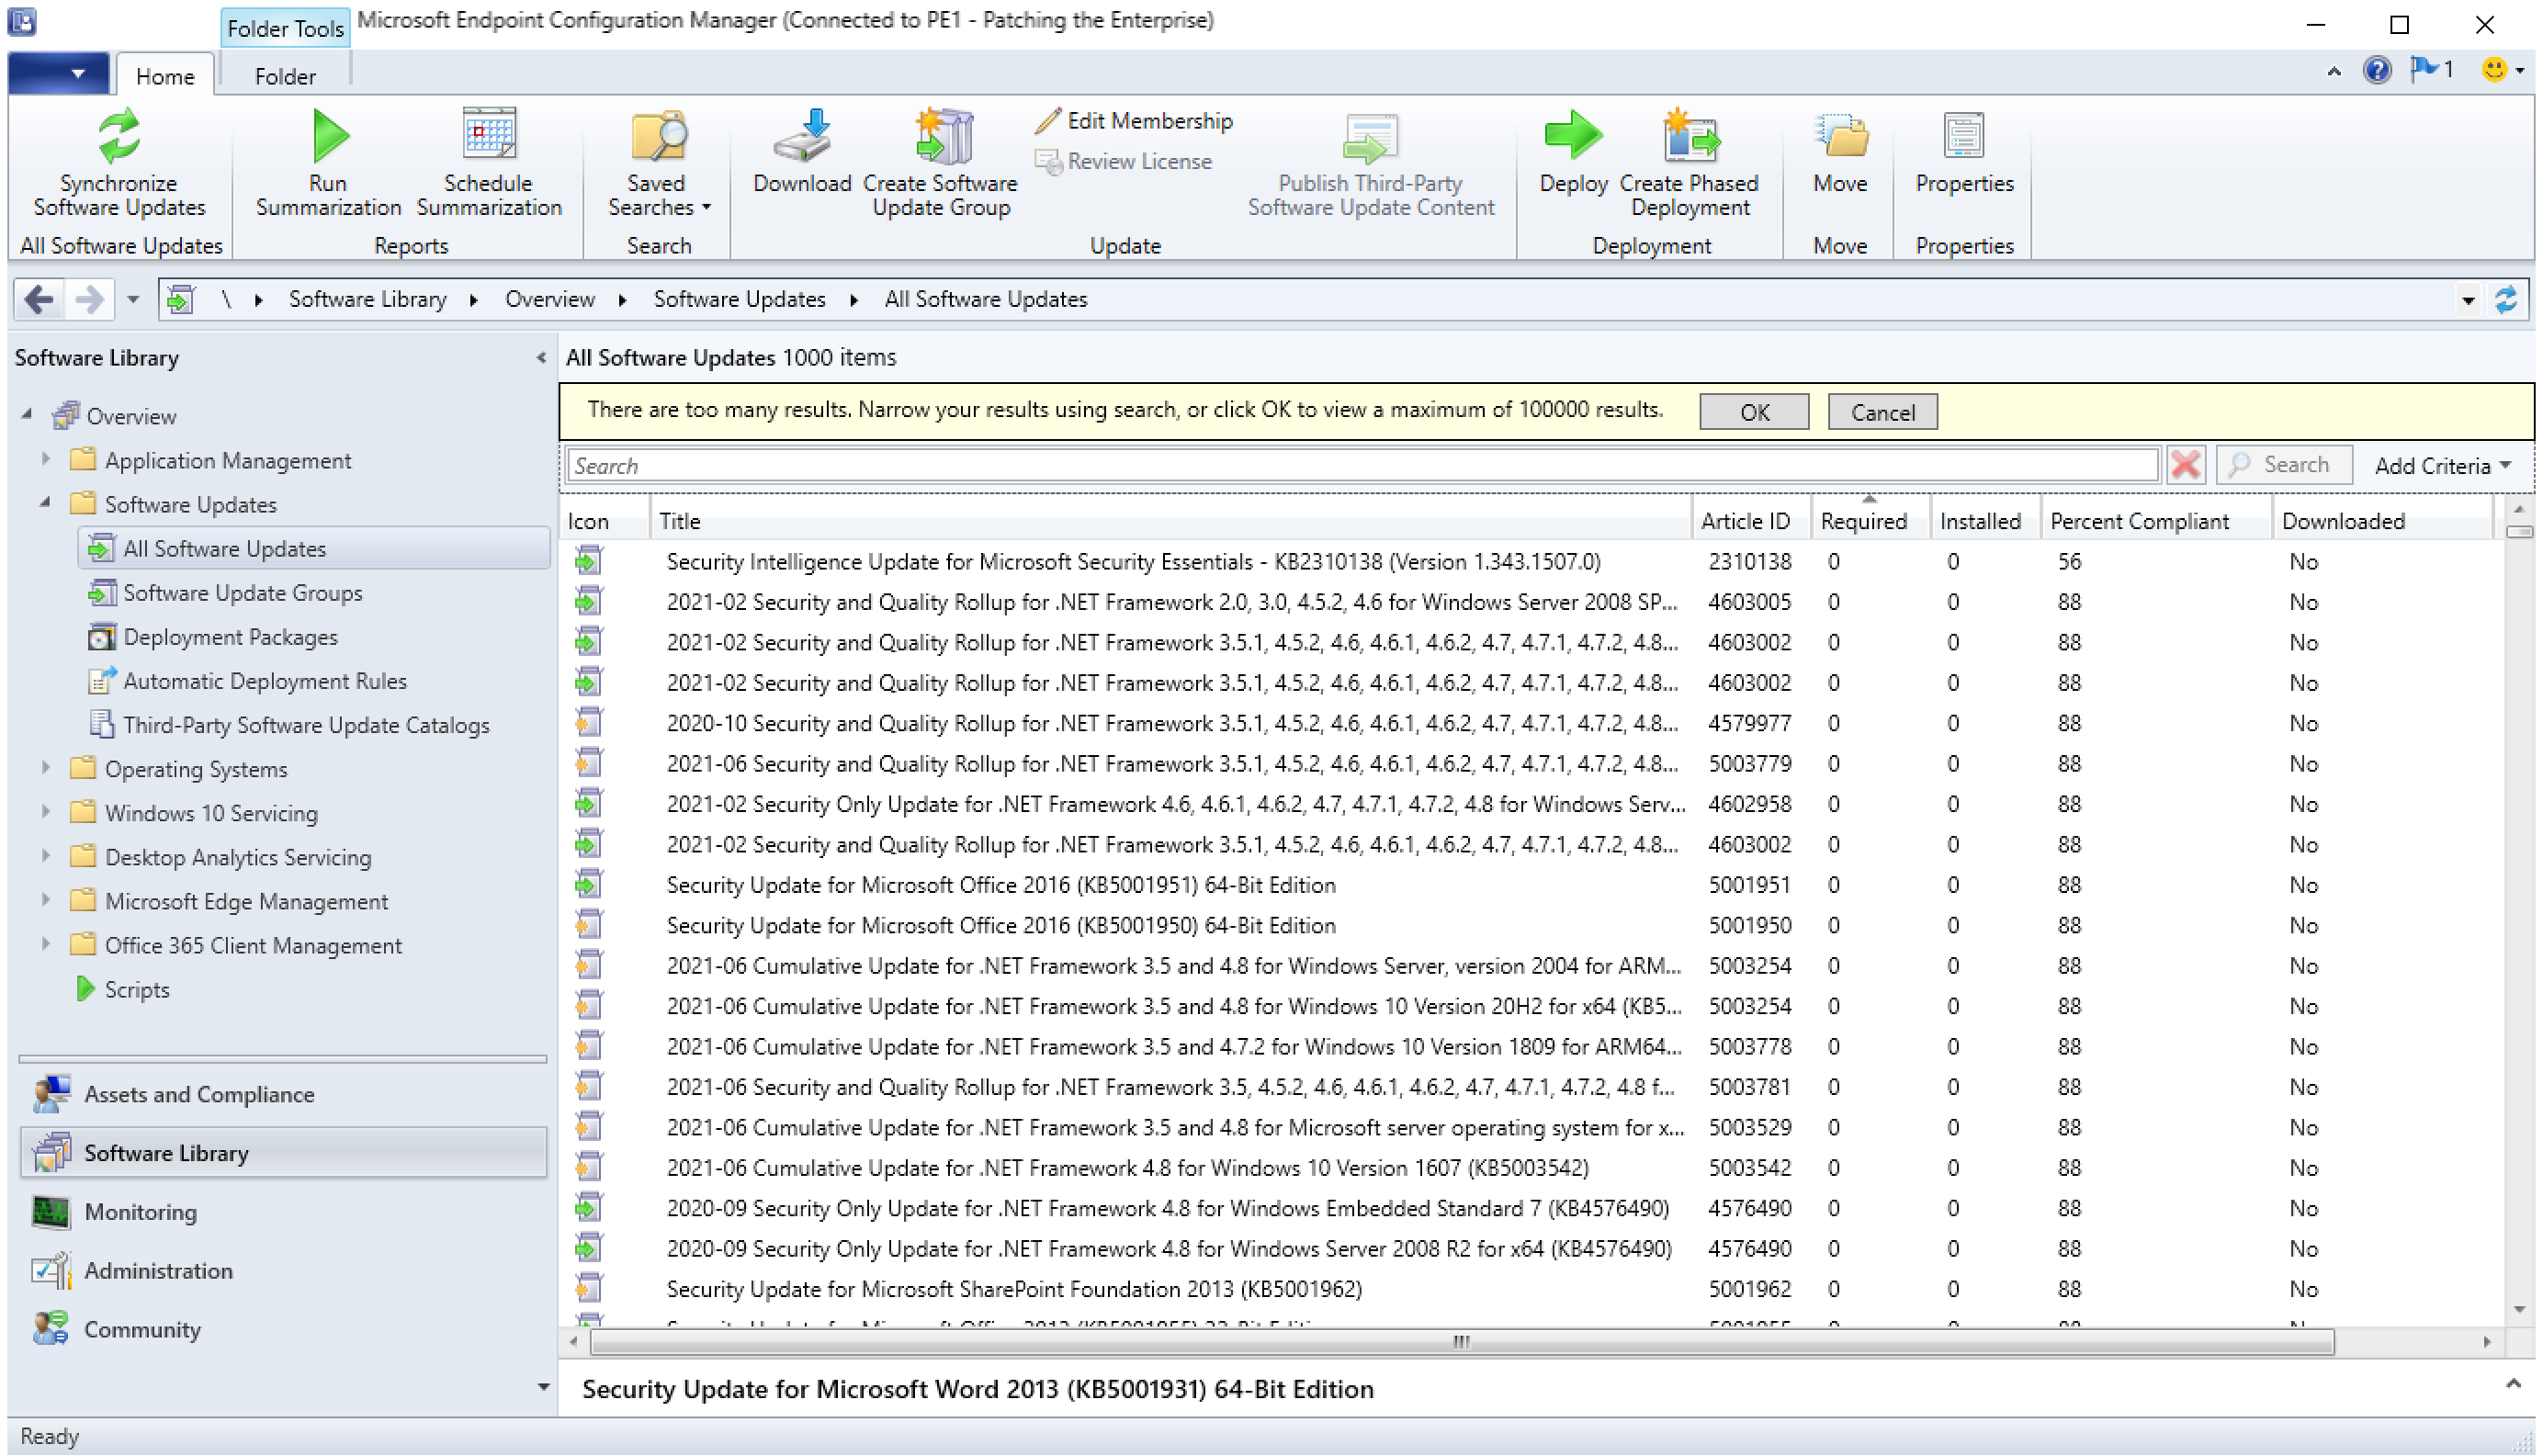 This is a screenshot depicting the All Software Updates View for Microsoft Endpoint Configuration Manager.